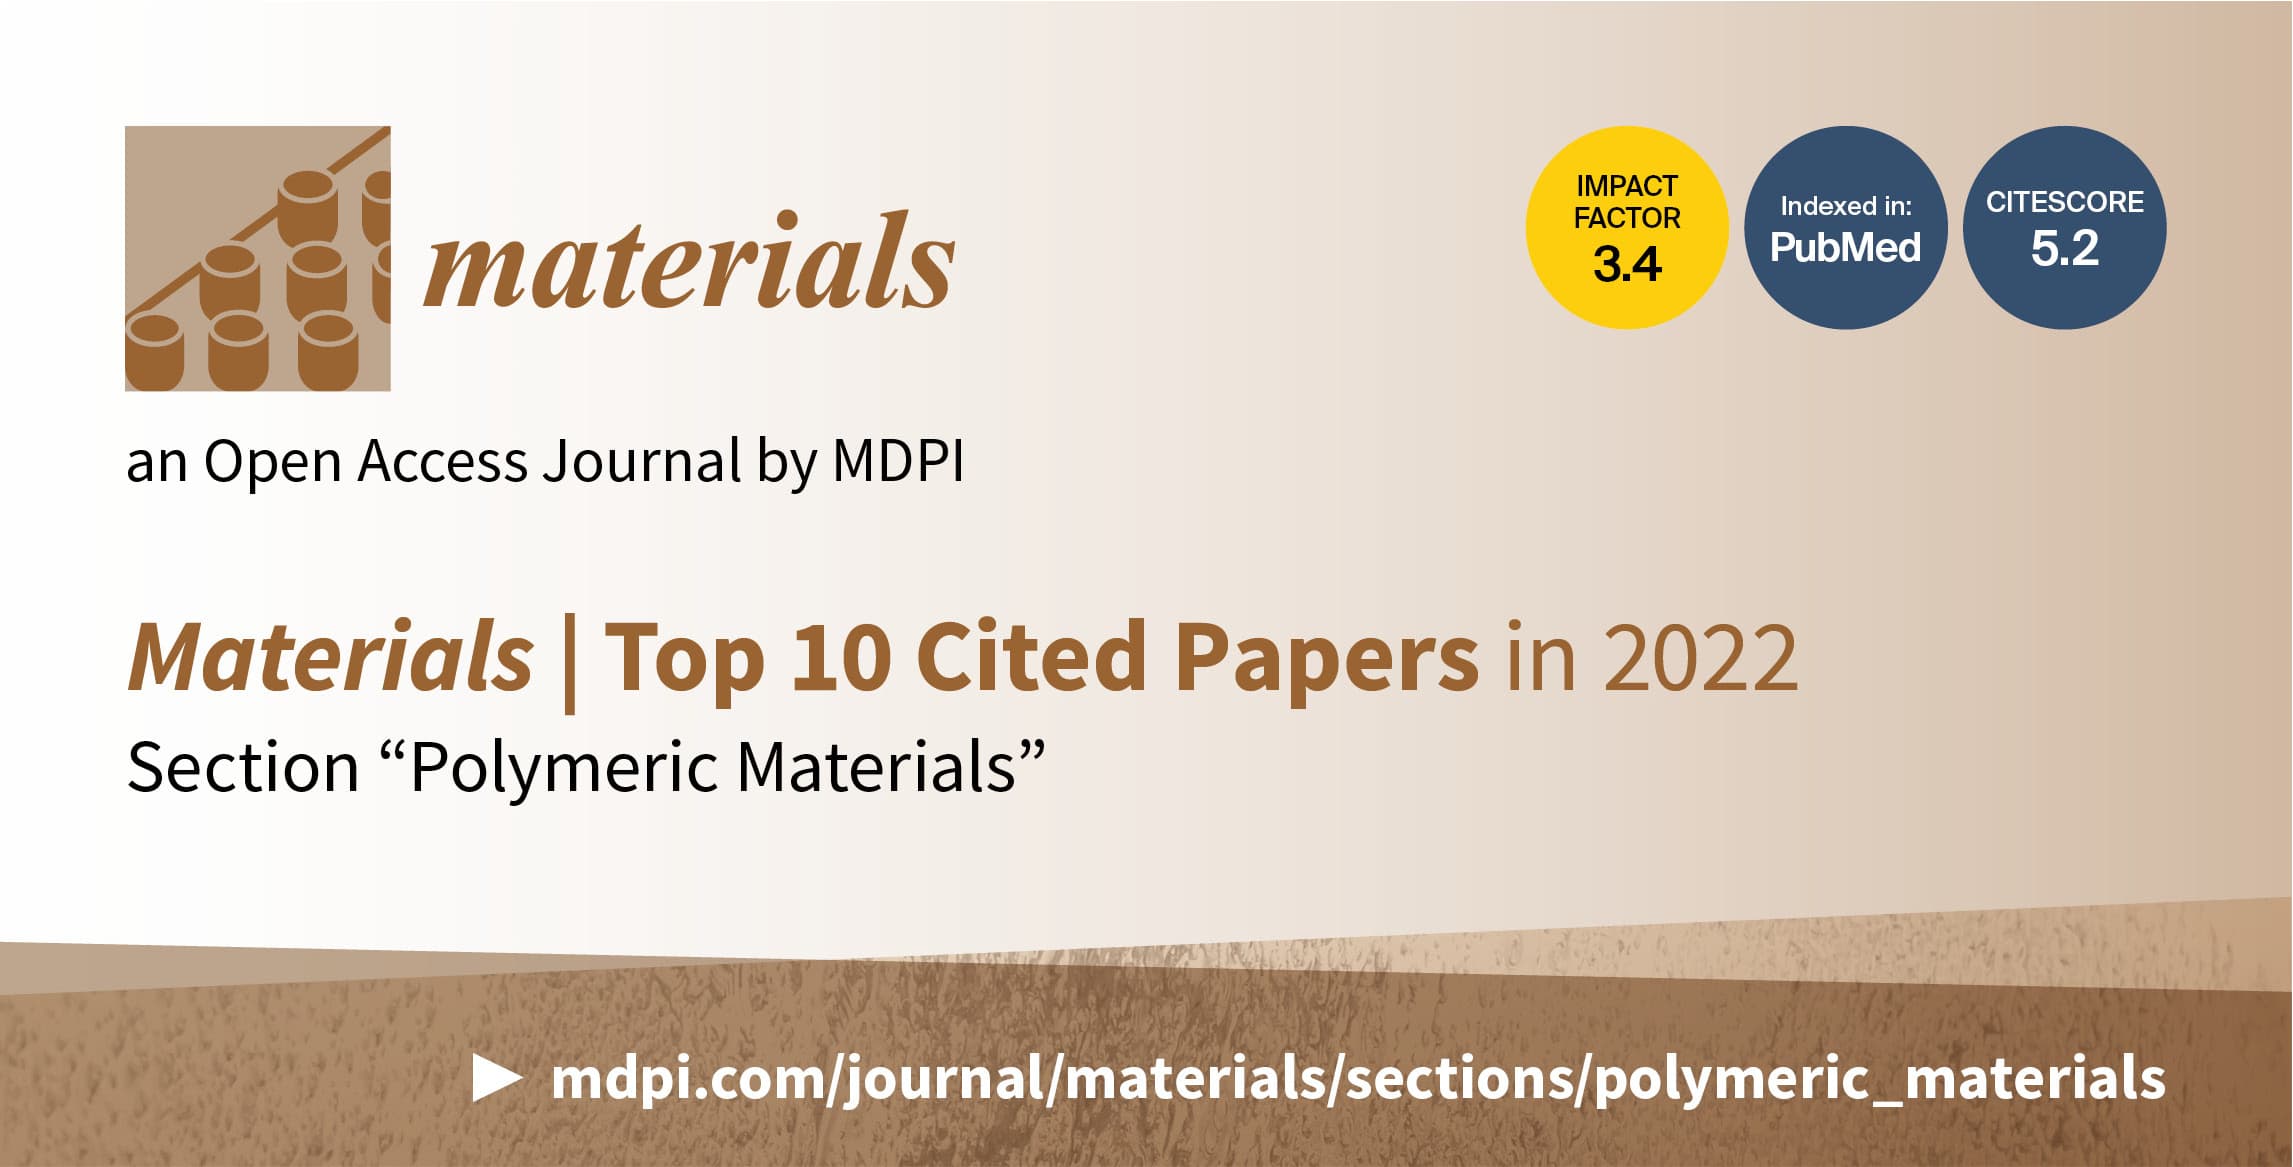 Open Peer Review for all MDPI Journals